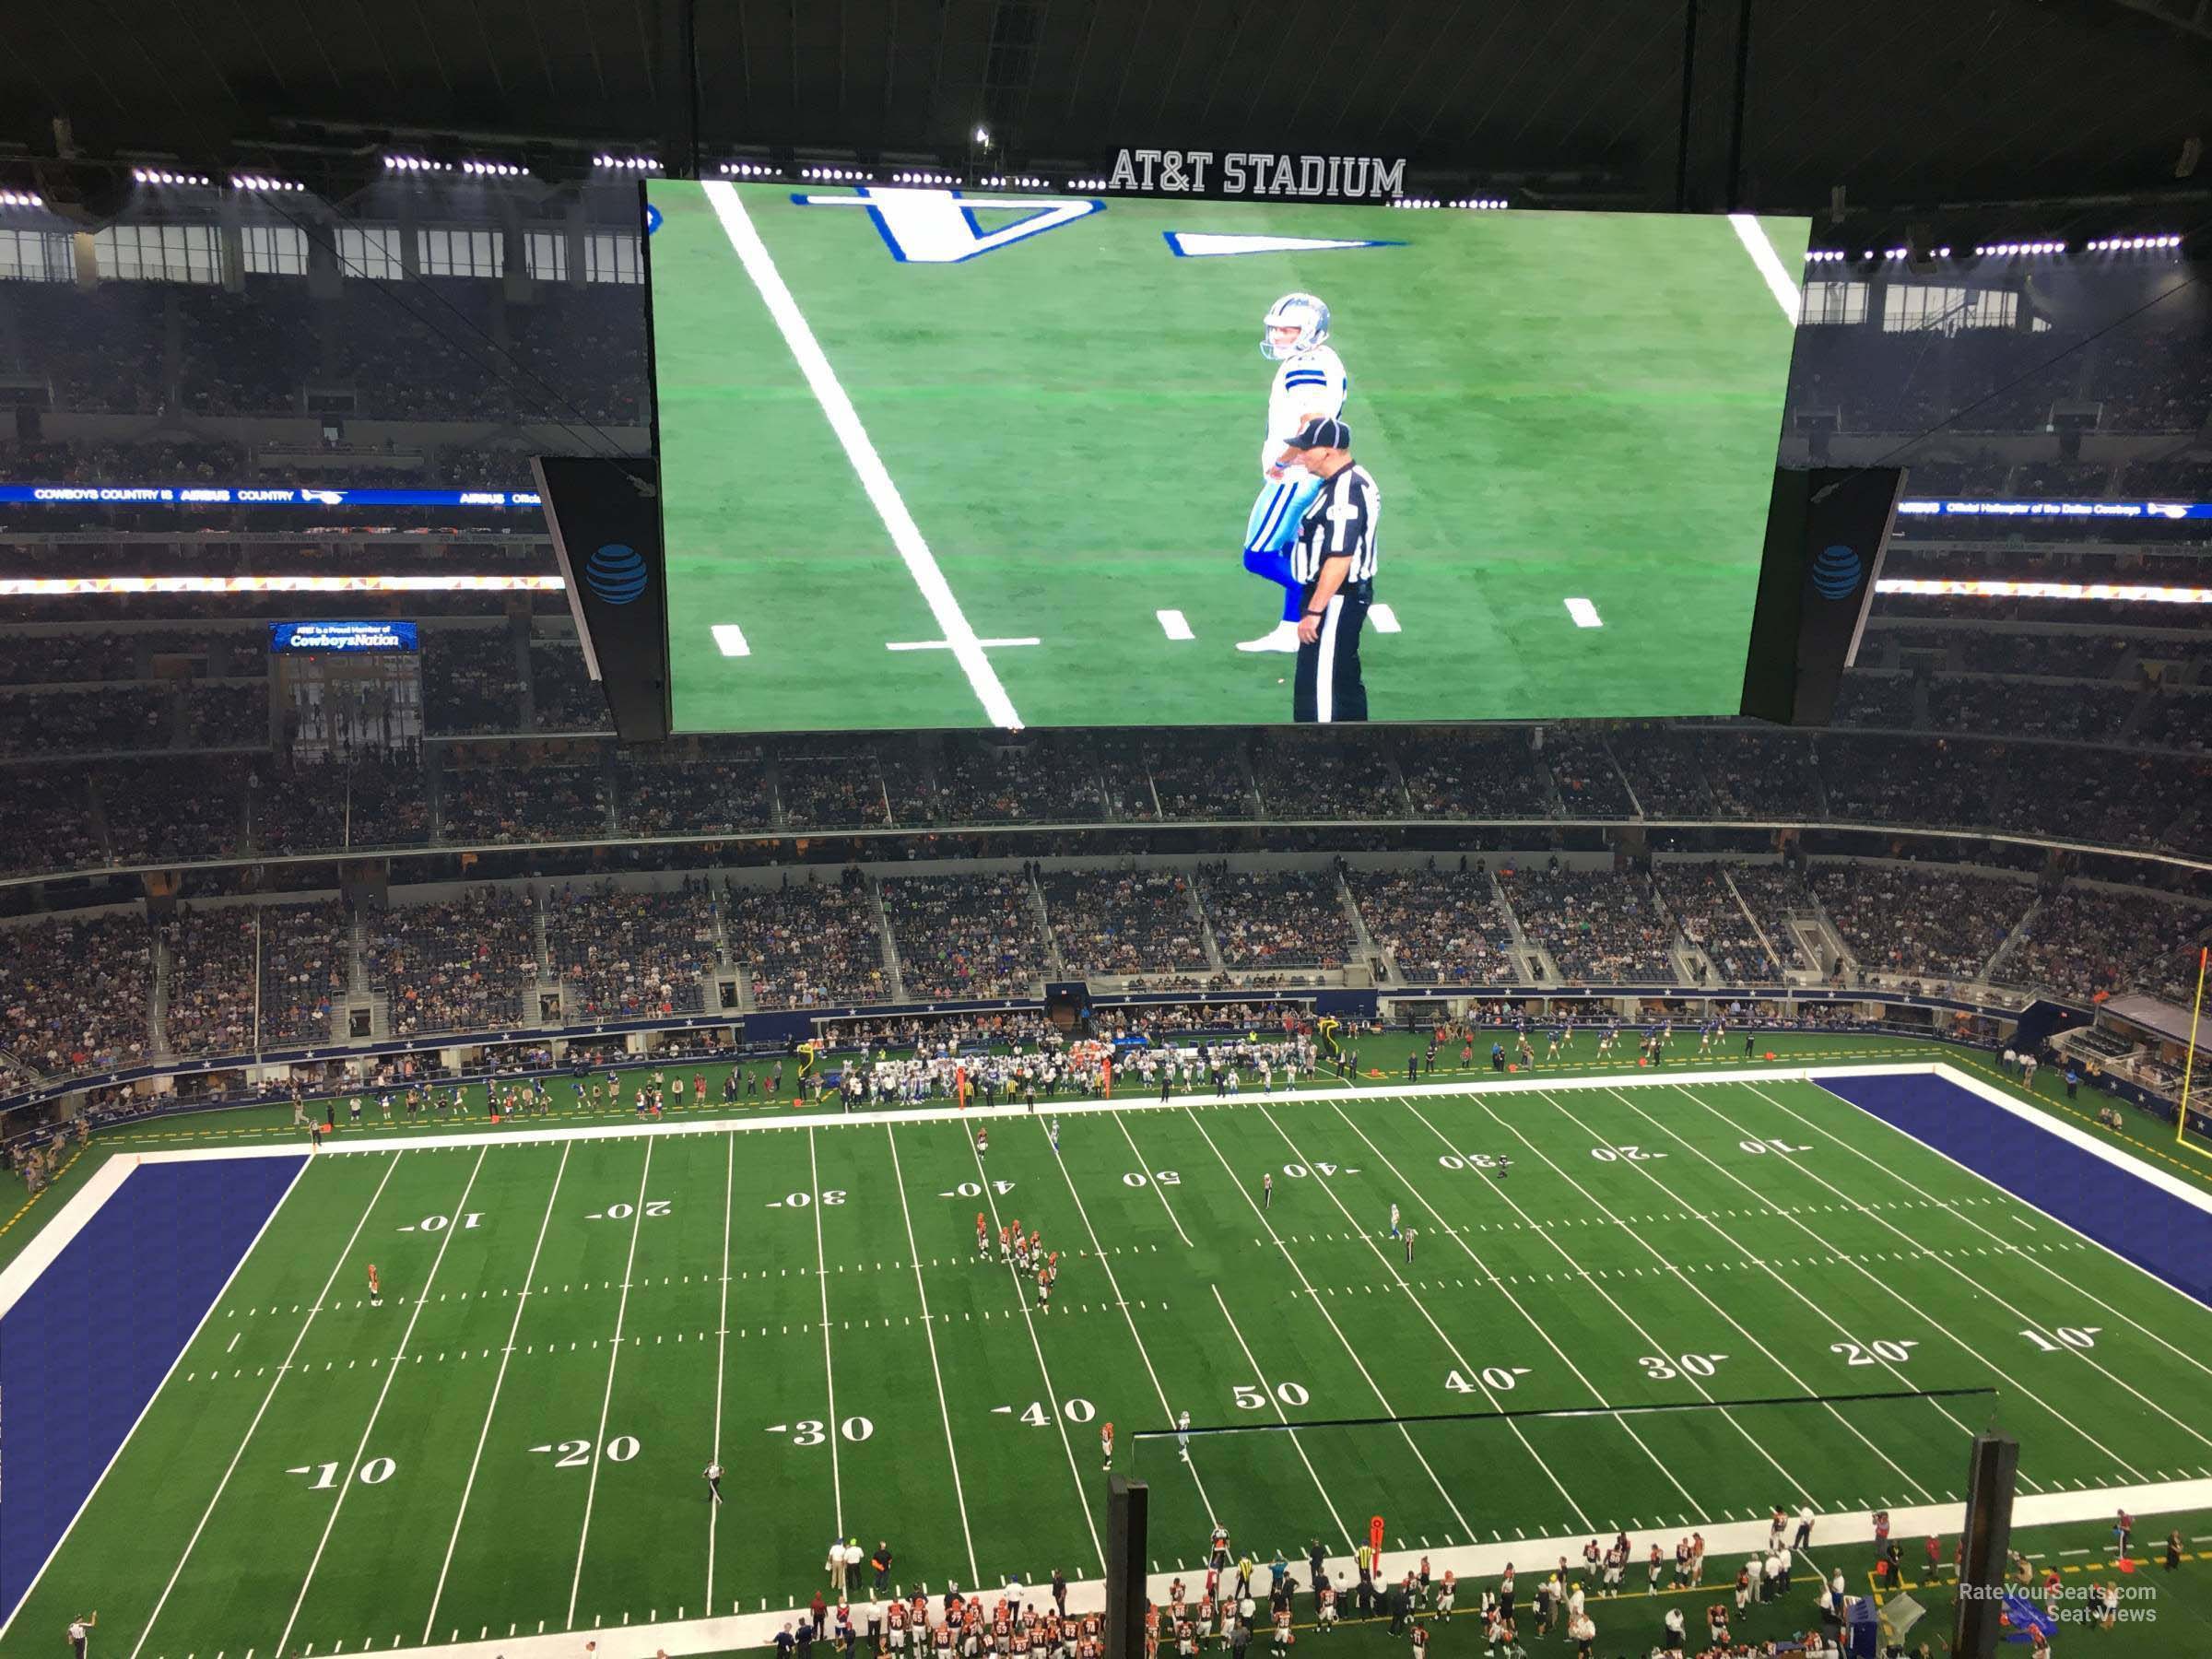 section 446, row 4 seat view  for football - at&t stadium (cowboys stadium)